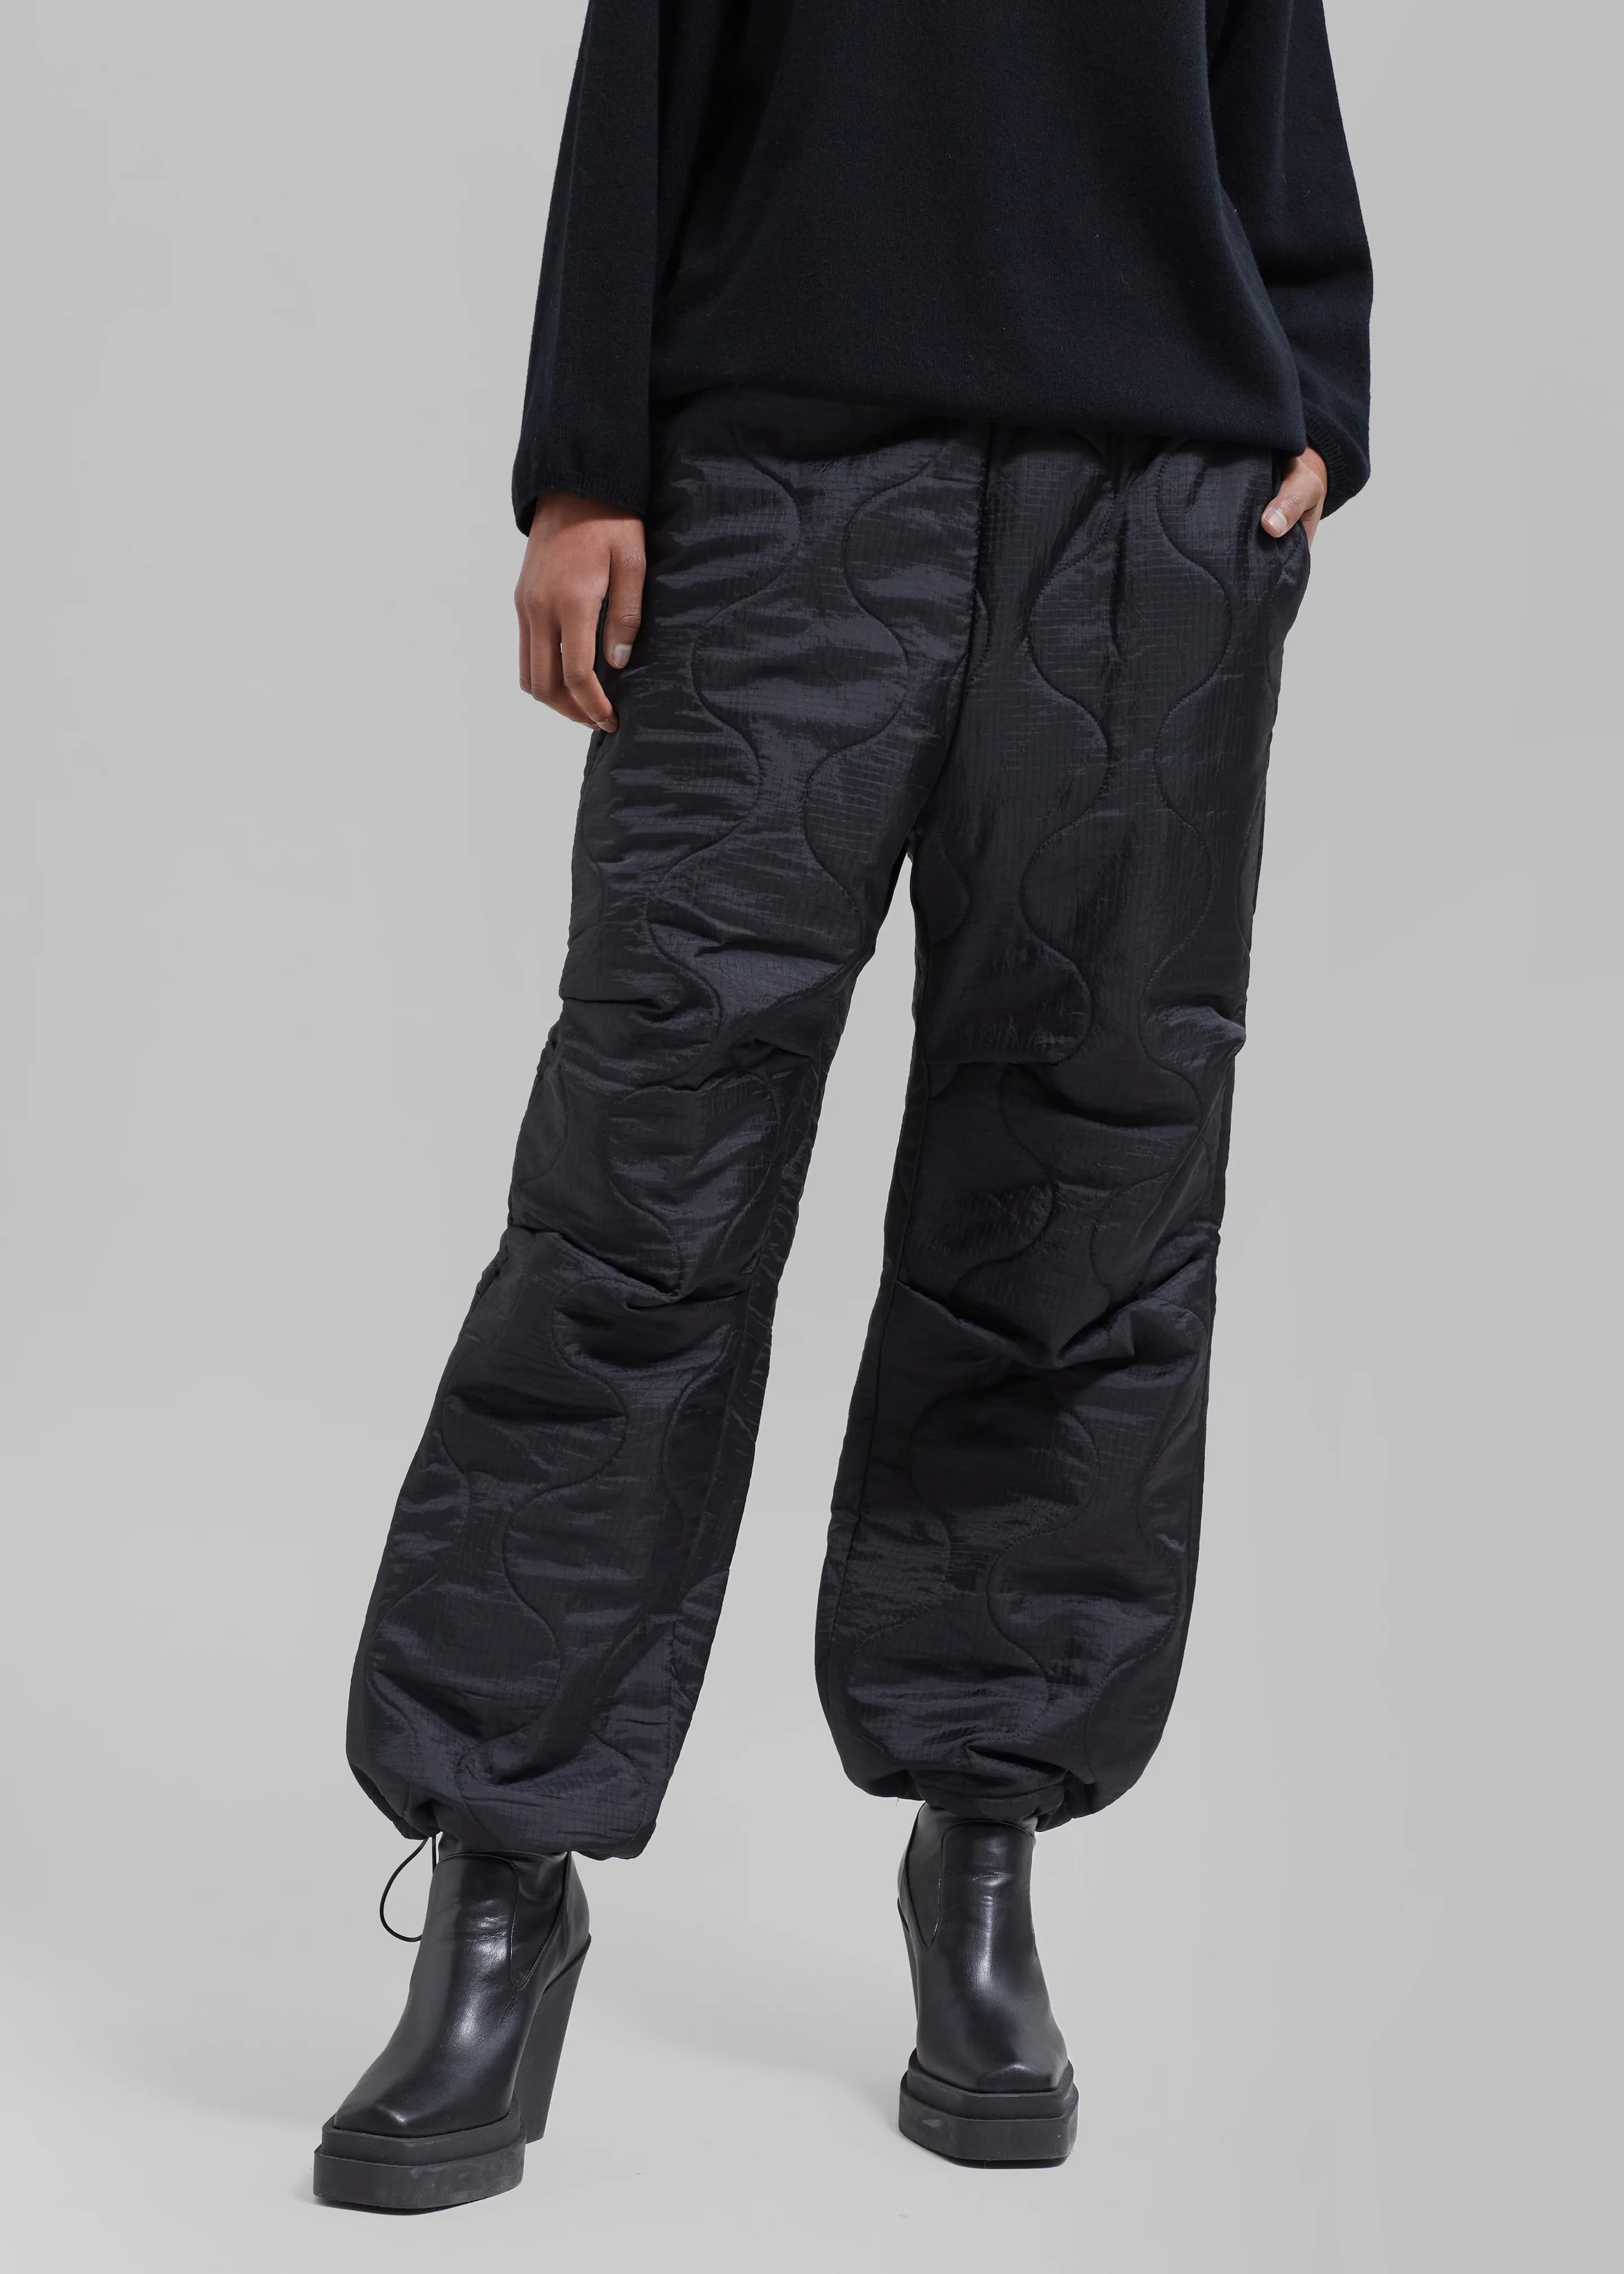 Dustine Quilted Joggers - Black - 6